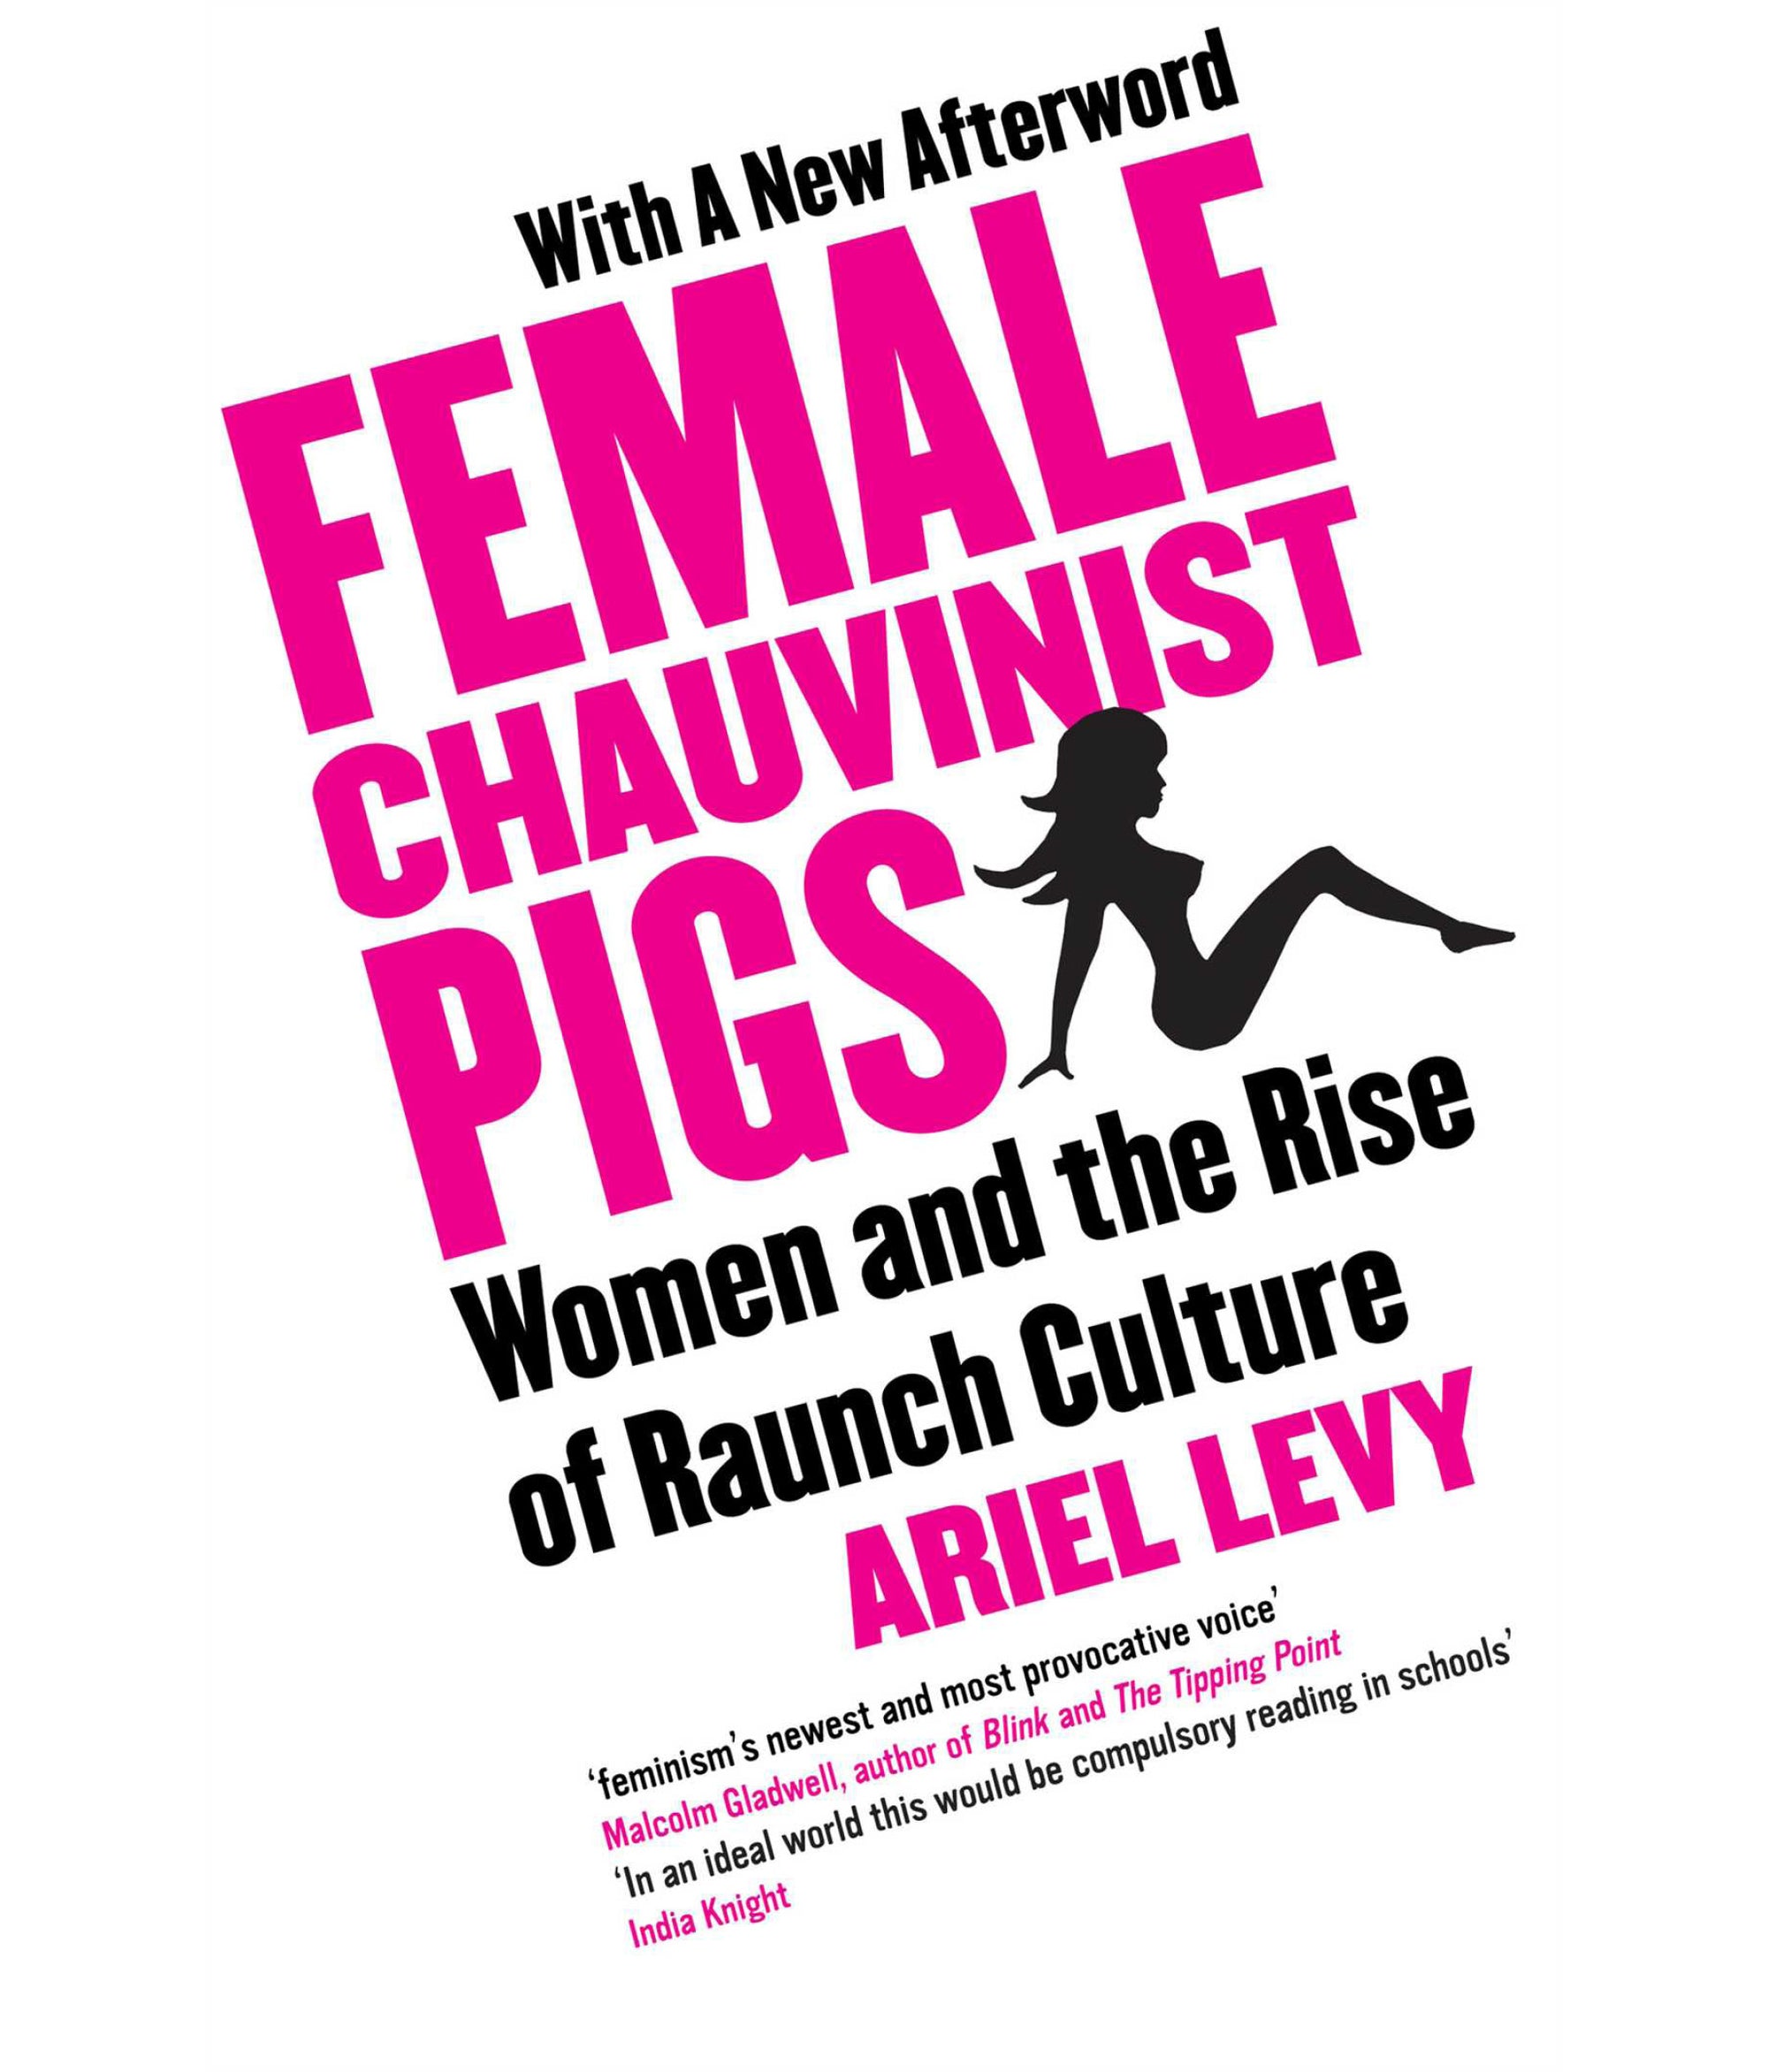 Famale chauvinist pigs: Women and the rise of raunch culture by Ariel Levy